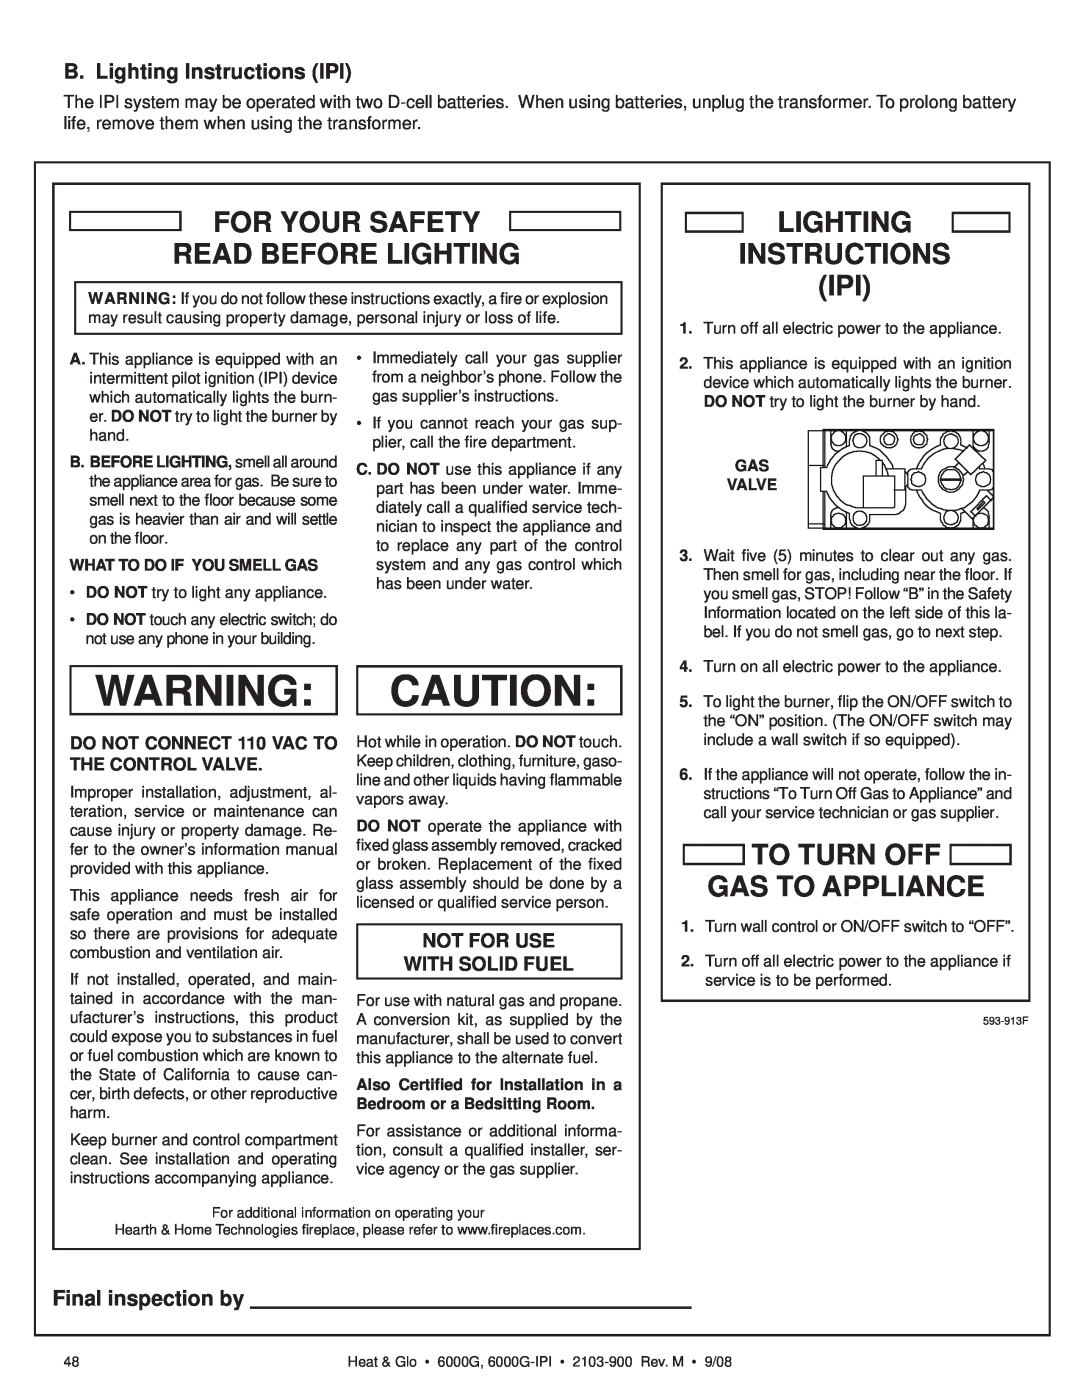 Heat & Glo LifeStyle 6000G-LP Warning: Caution, For Your Safety Read Before Lighting, Lighting Instructions Ipi, Gas Valve 